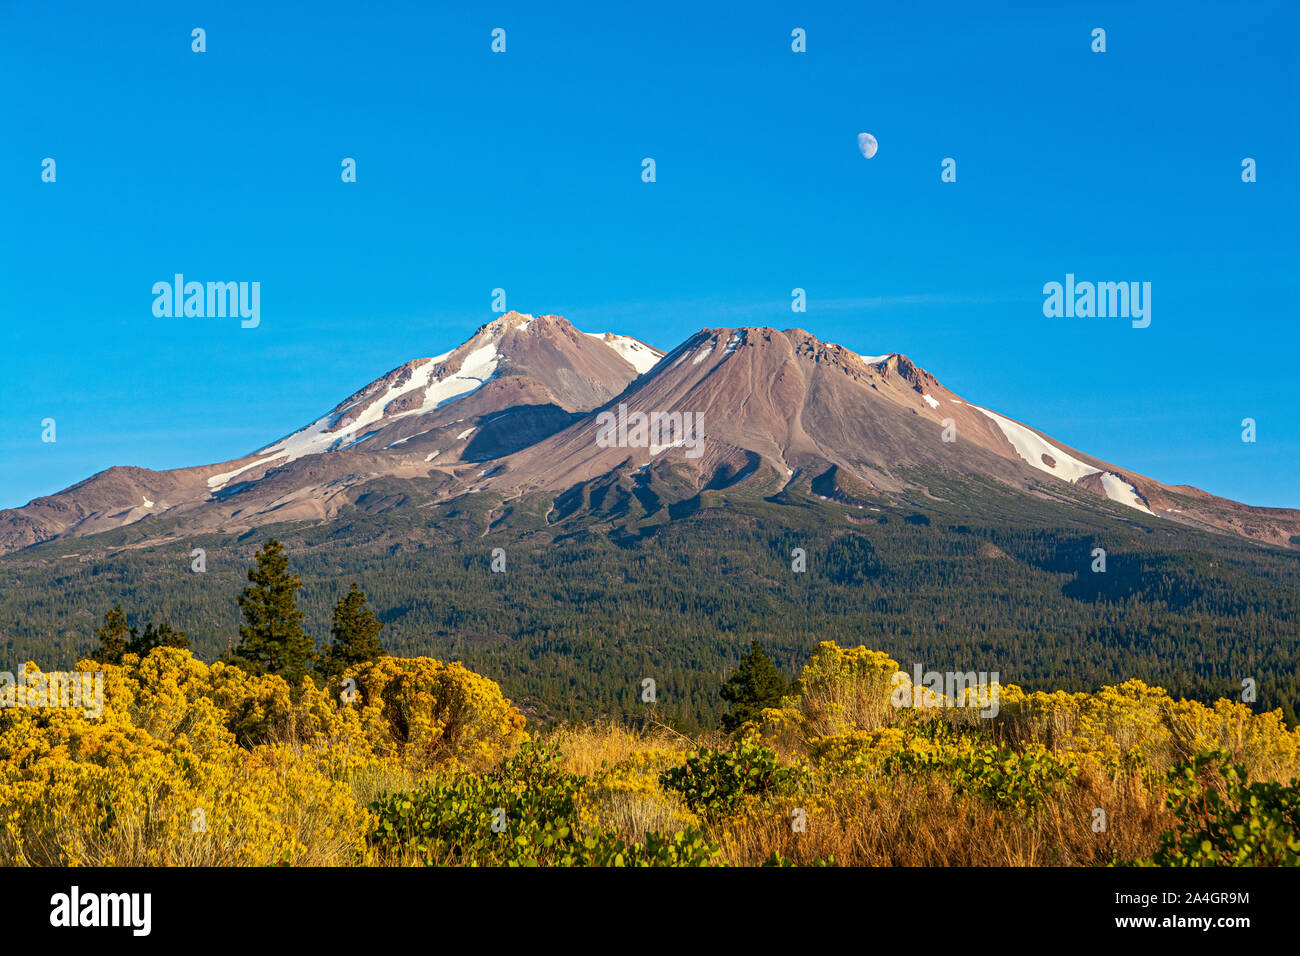 California, Mount Shasta, Siskiyou County, view from Hwy 97 the Volcanic Legacy Scenic Byway Stock Photo